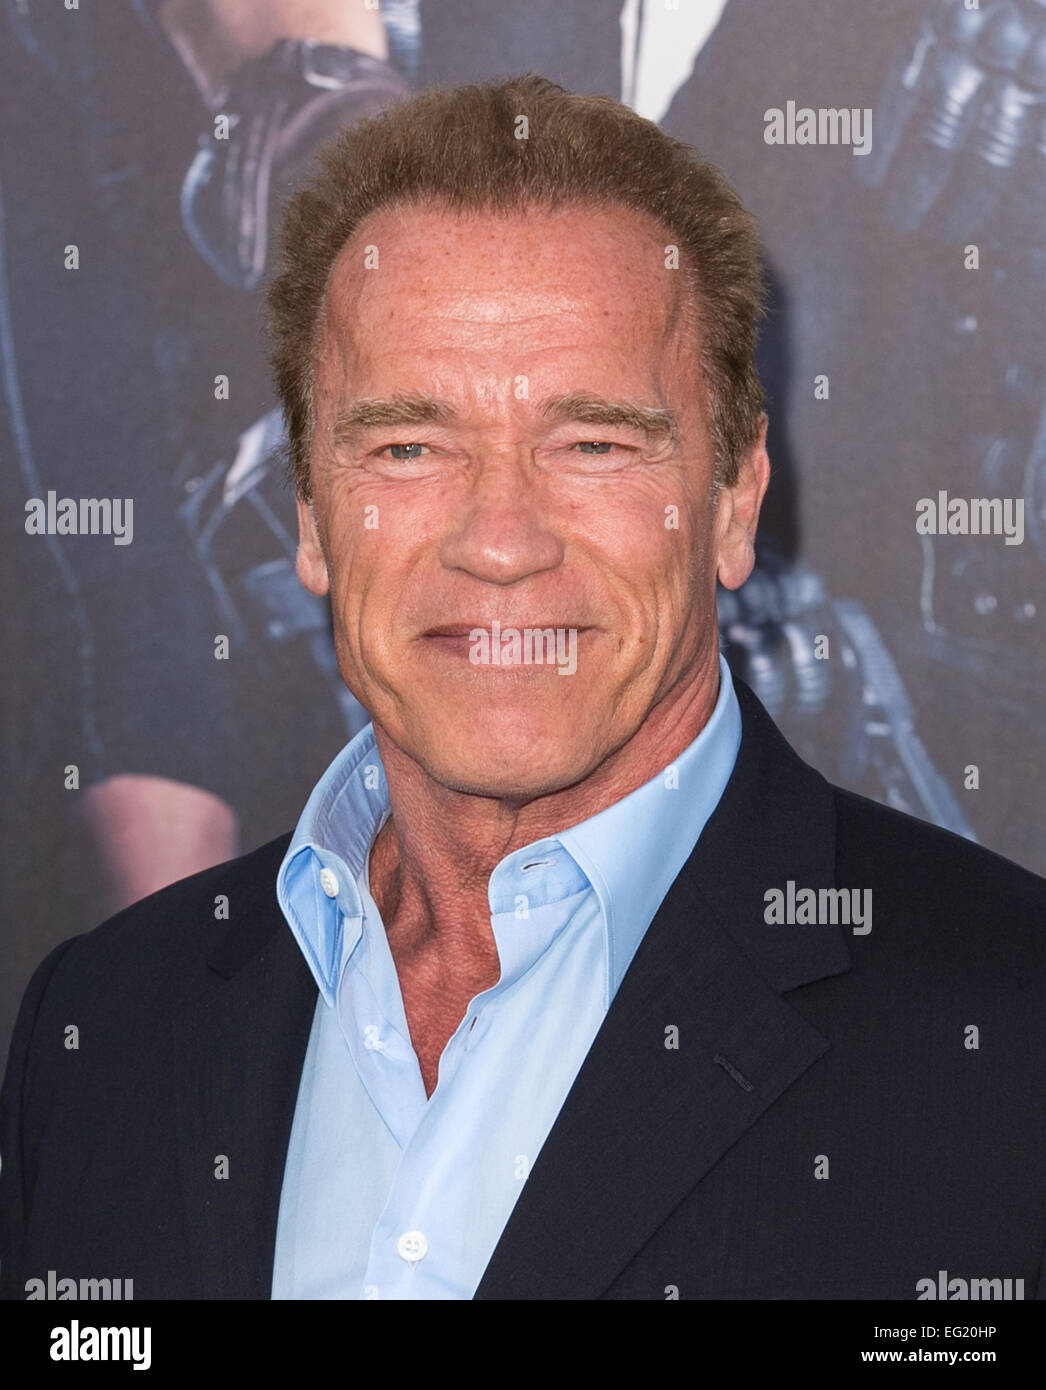 'The Expendables 3' Premiere held at the TCL Chinese Theatre - Arrivals  Featuring: Arnold Schwarzenegger Where: Los Angeles, California, United States When: 11 Aug 2014 Stock Photo